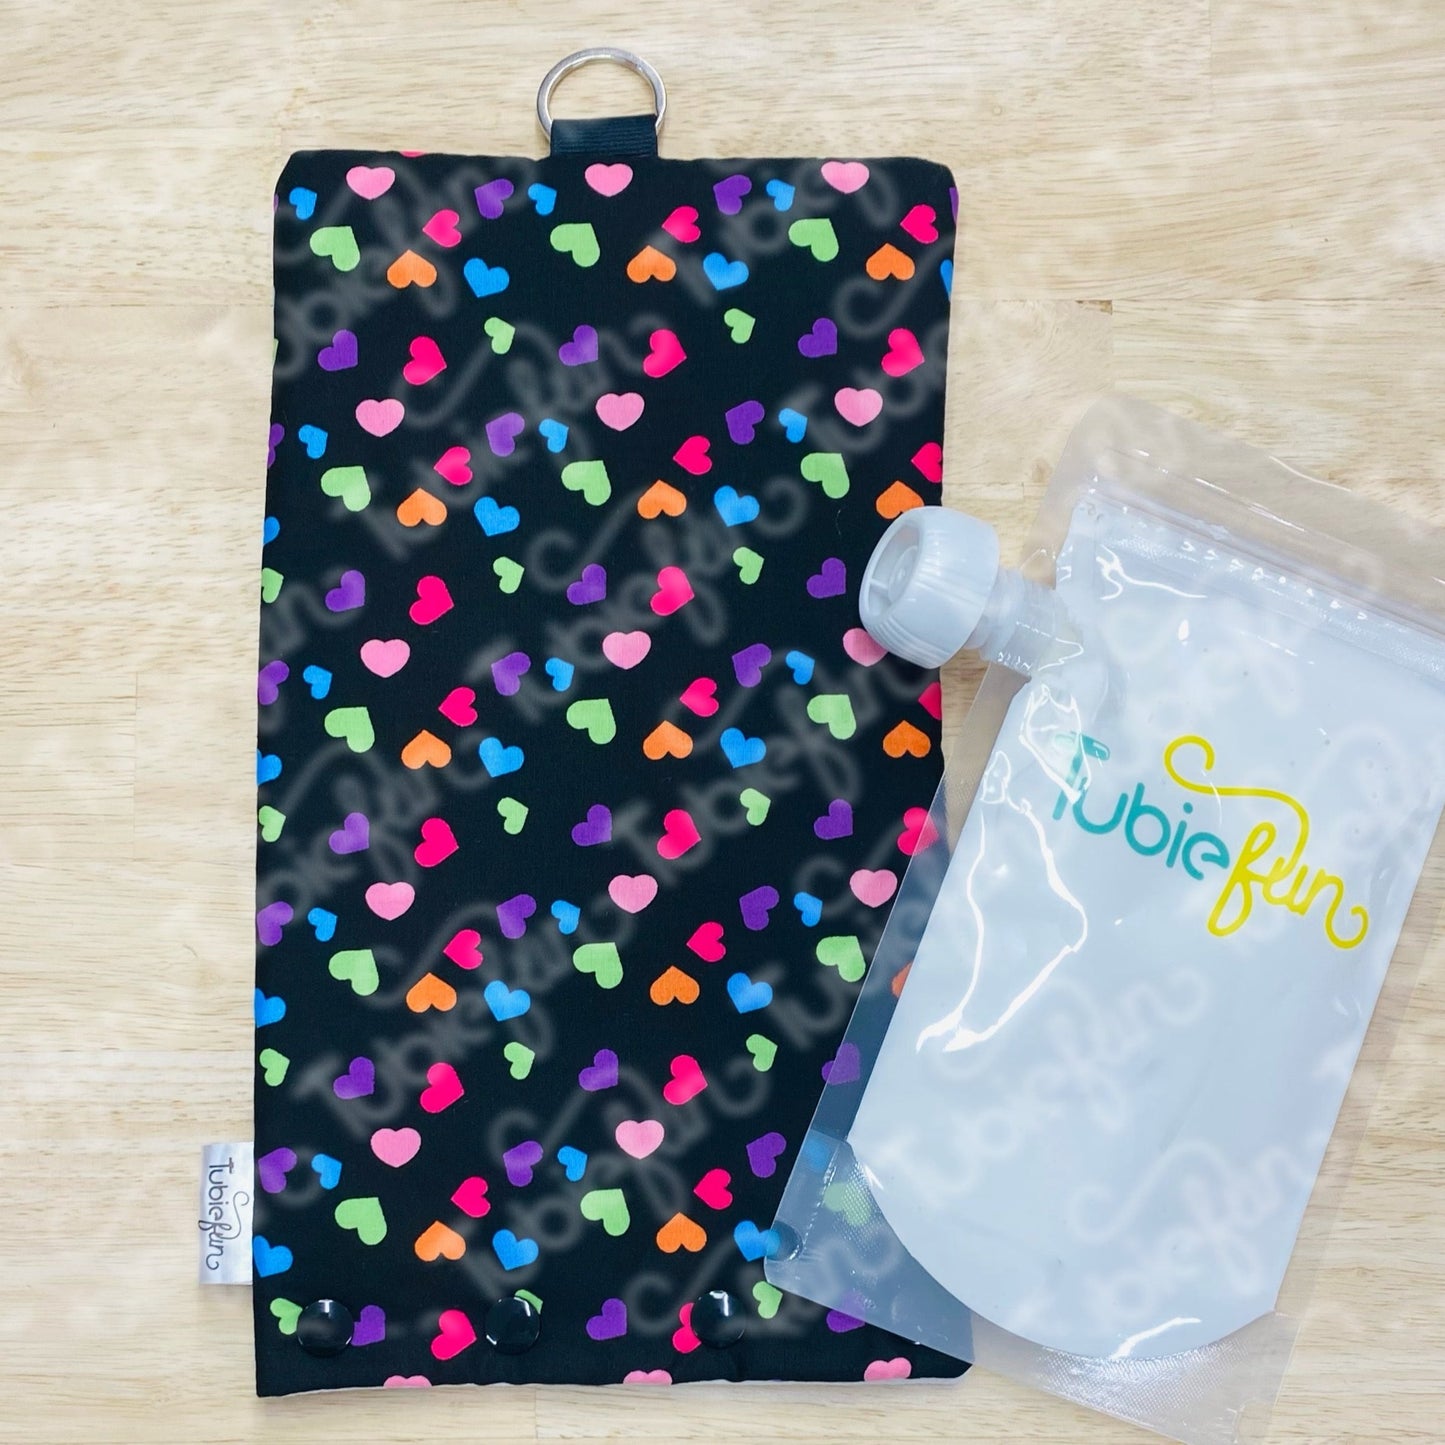 NEW Insulated Milk Bag Suitable for Tubie Fun 500ml Reusable Pouches - Coloured Hearts on Black